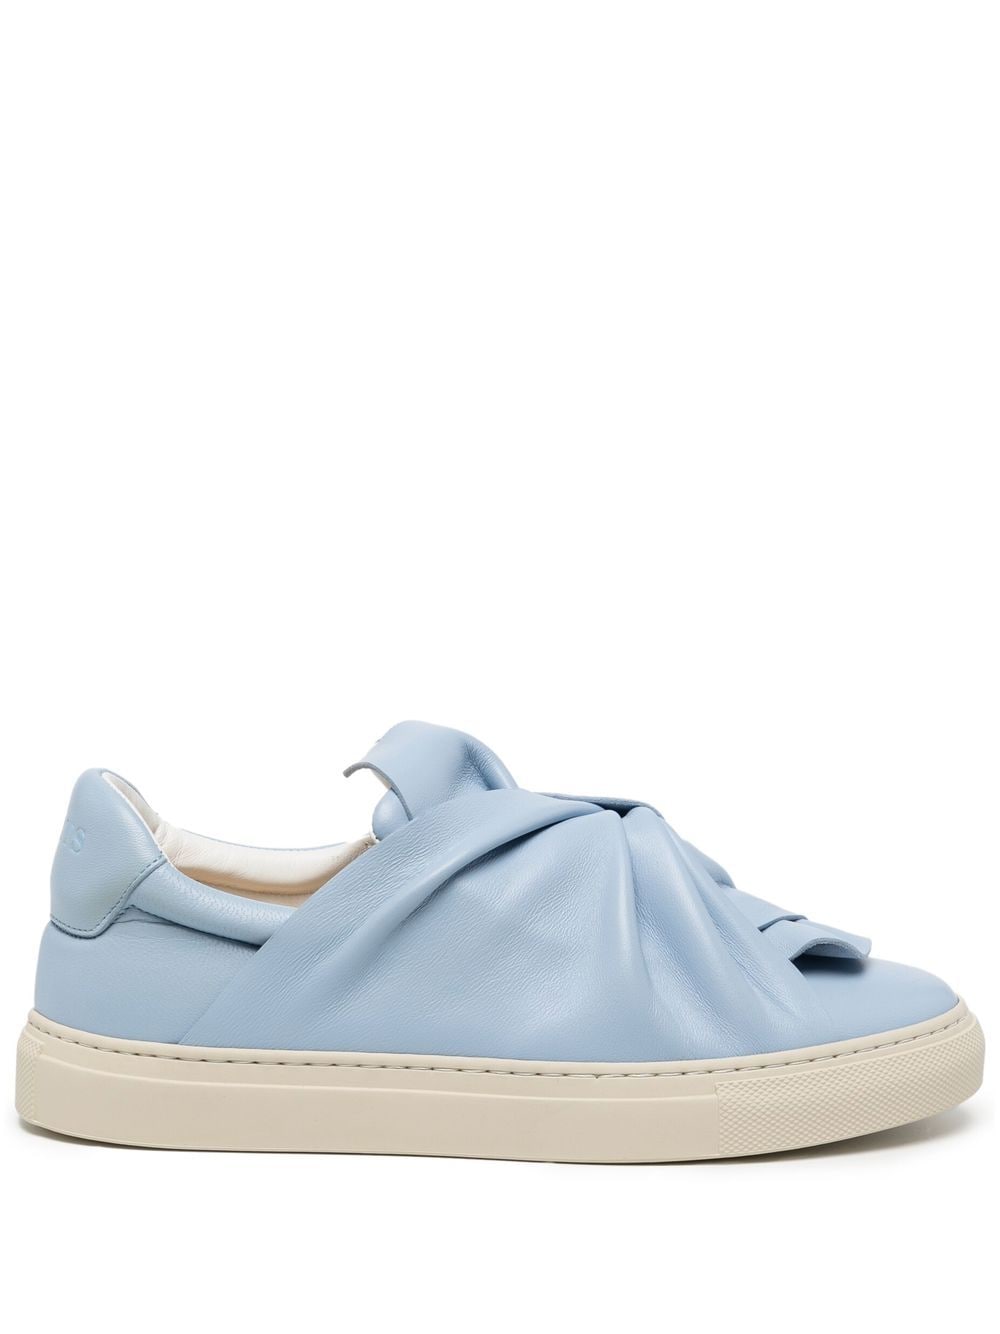 Ports 1961 knotted leather sneakers - Blue von Ports 1961